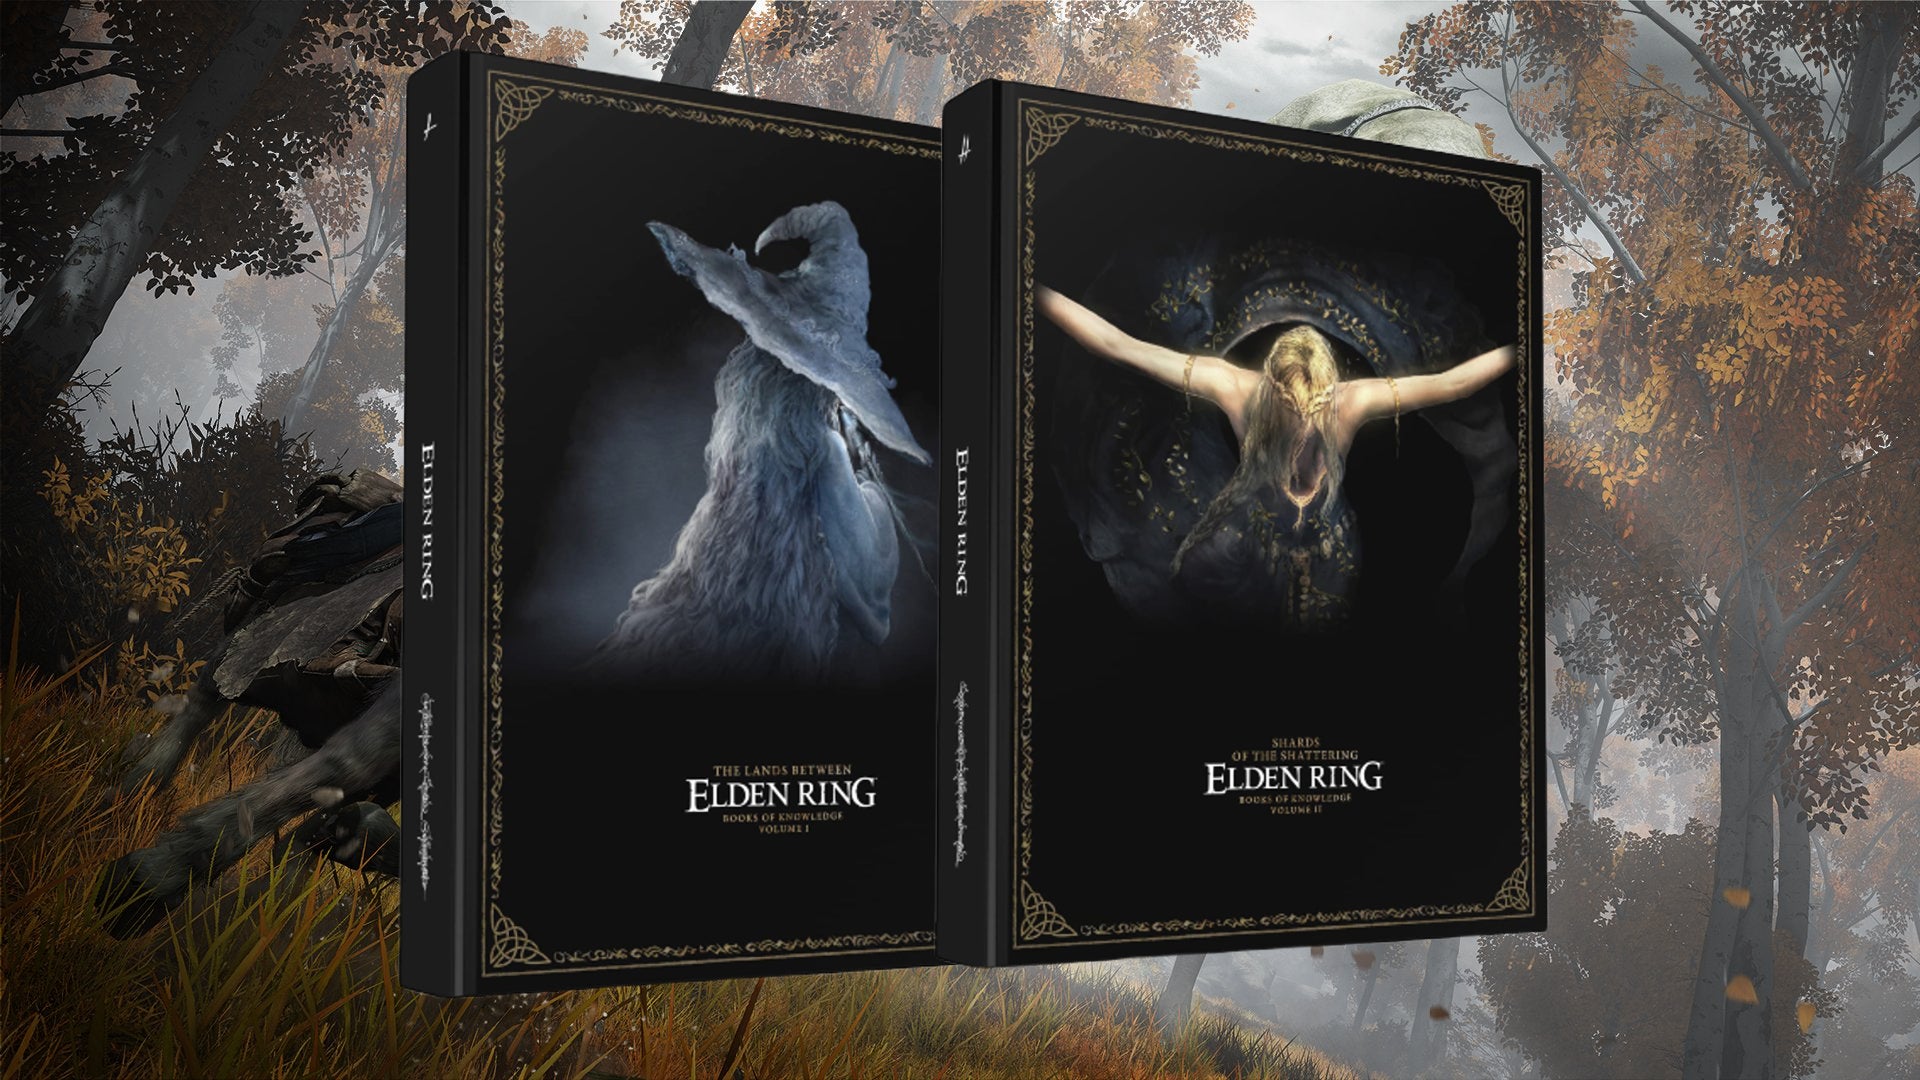 Official Elden Ring strategy guides now available to preorder at a